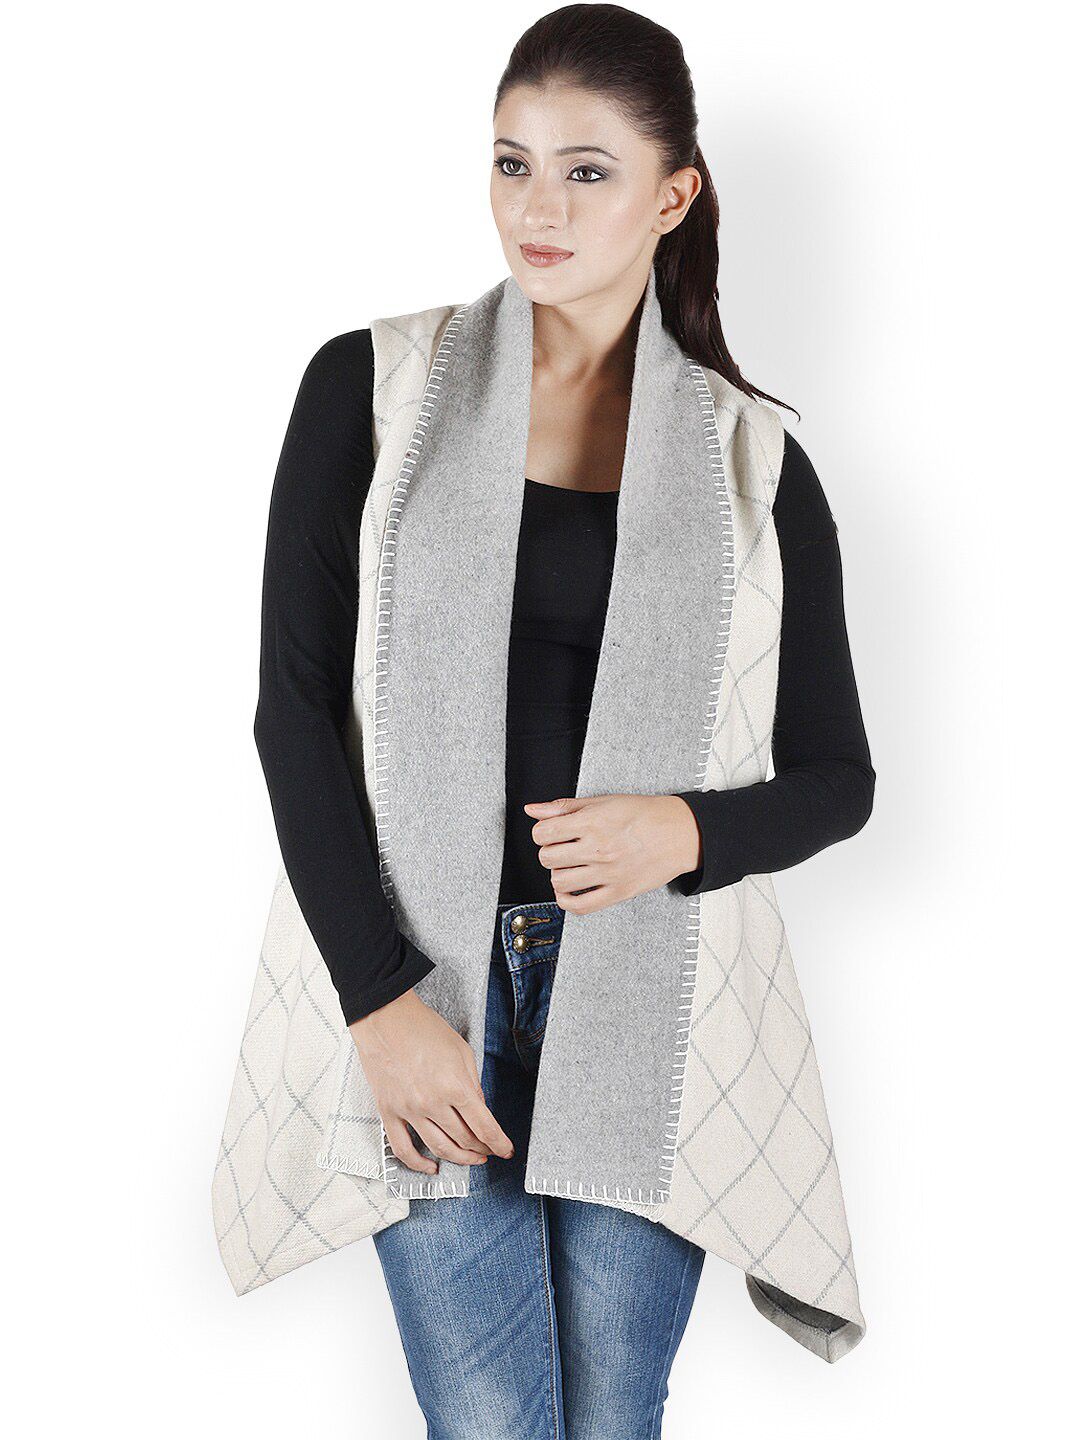 Owncraft White Checked Woollen Shrug Price in India